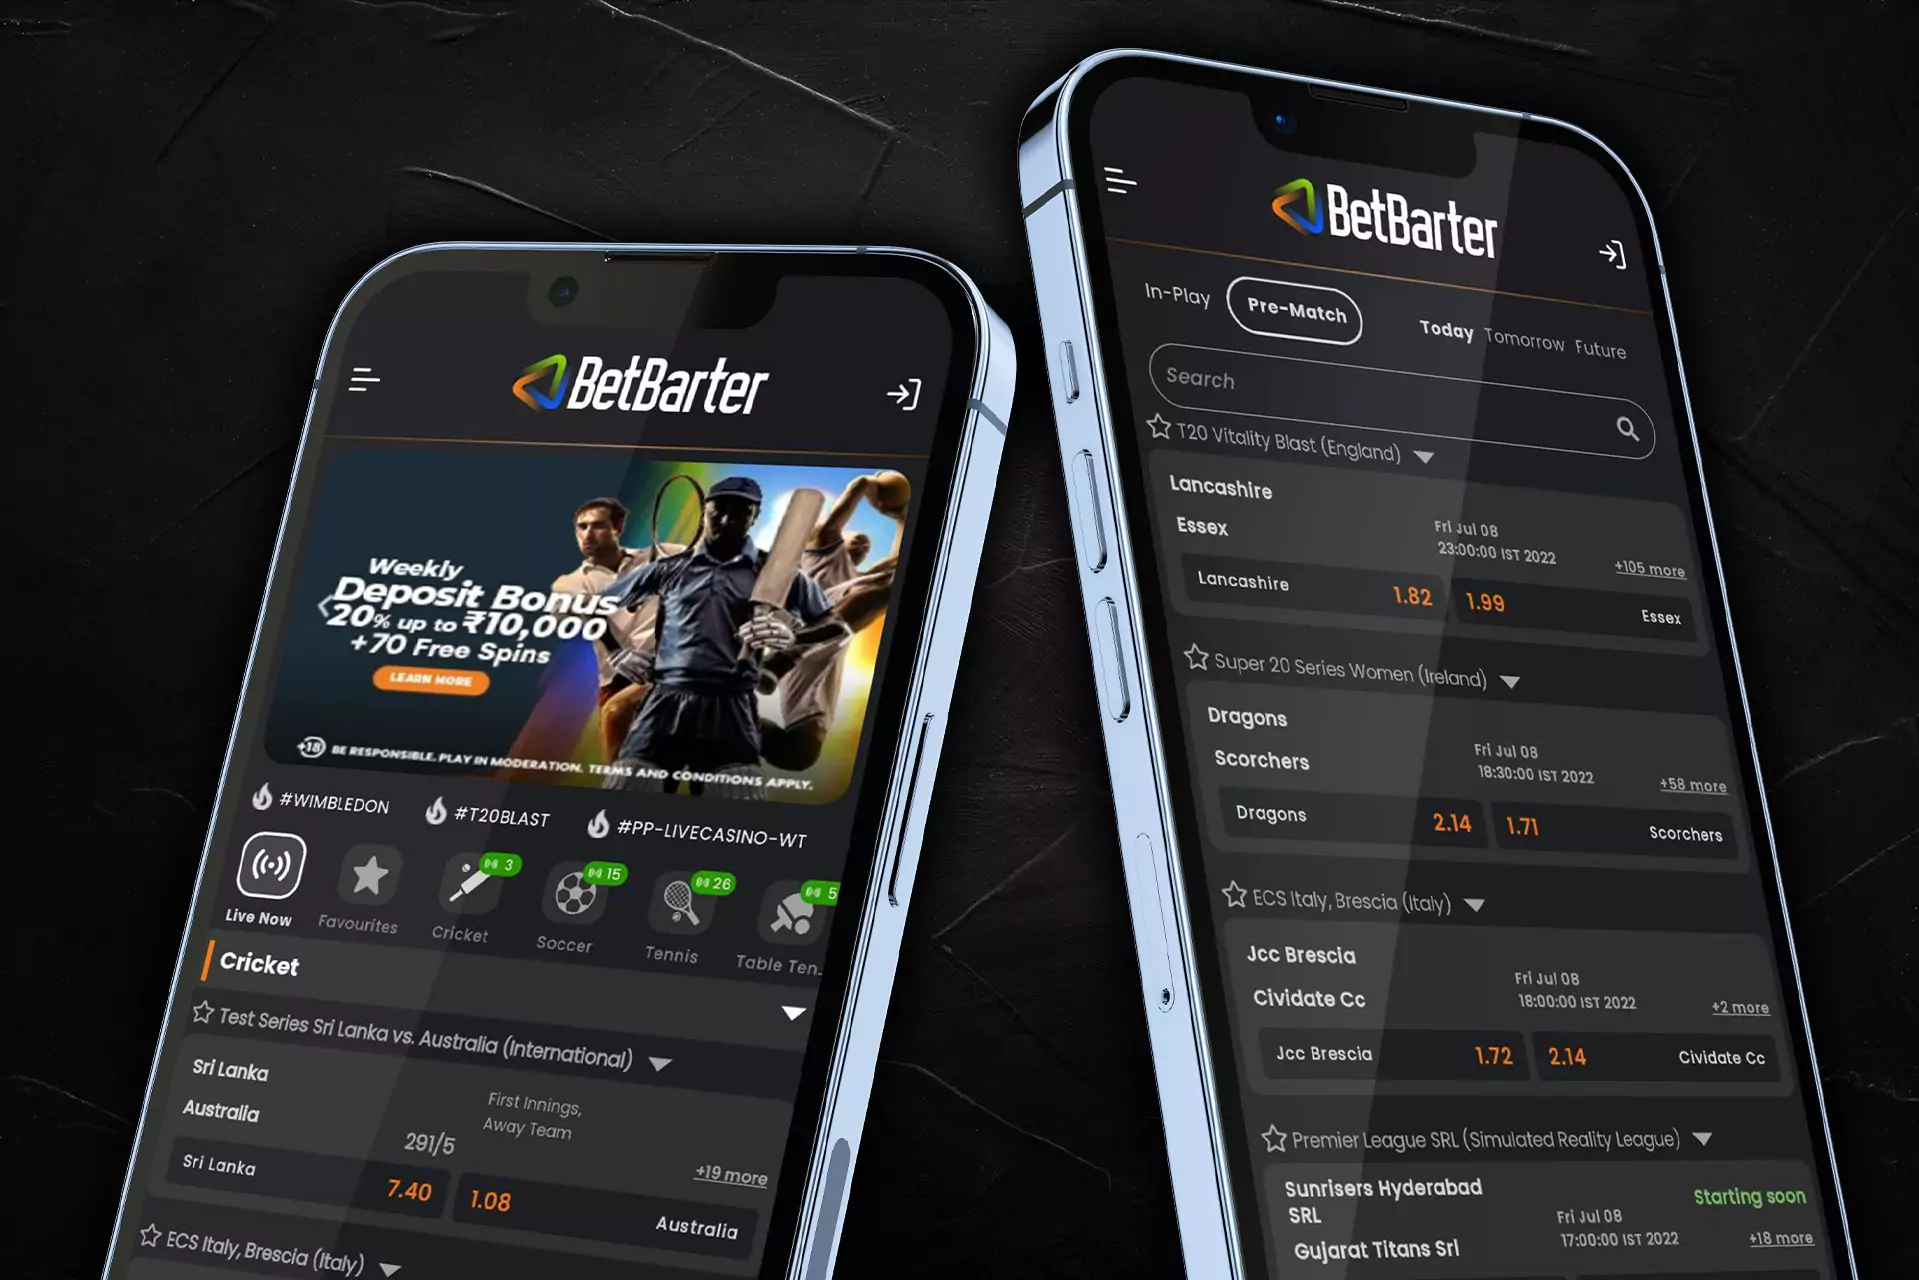 The Betbarter app supports a variety of sports betting options.